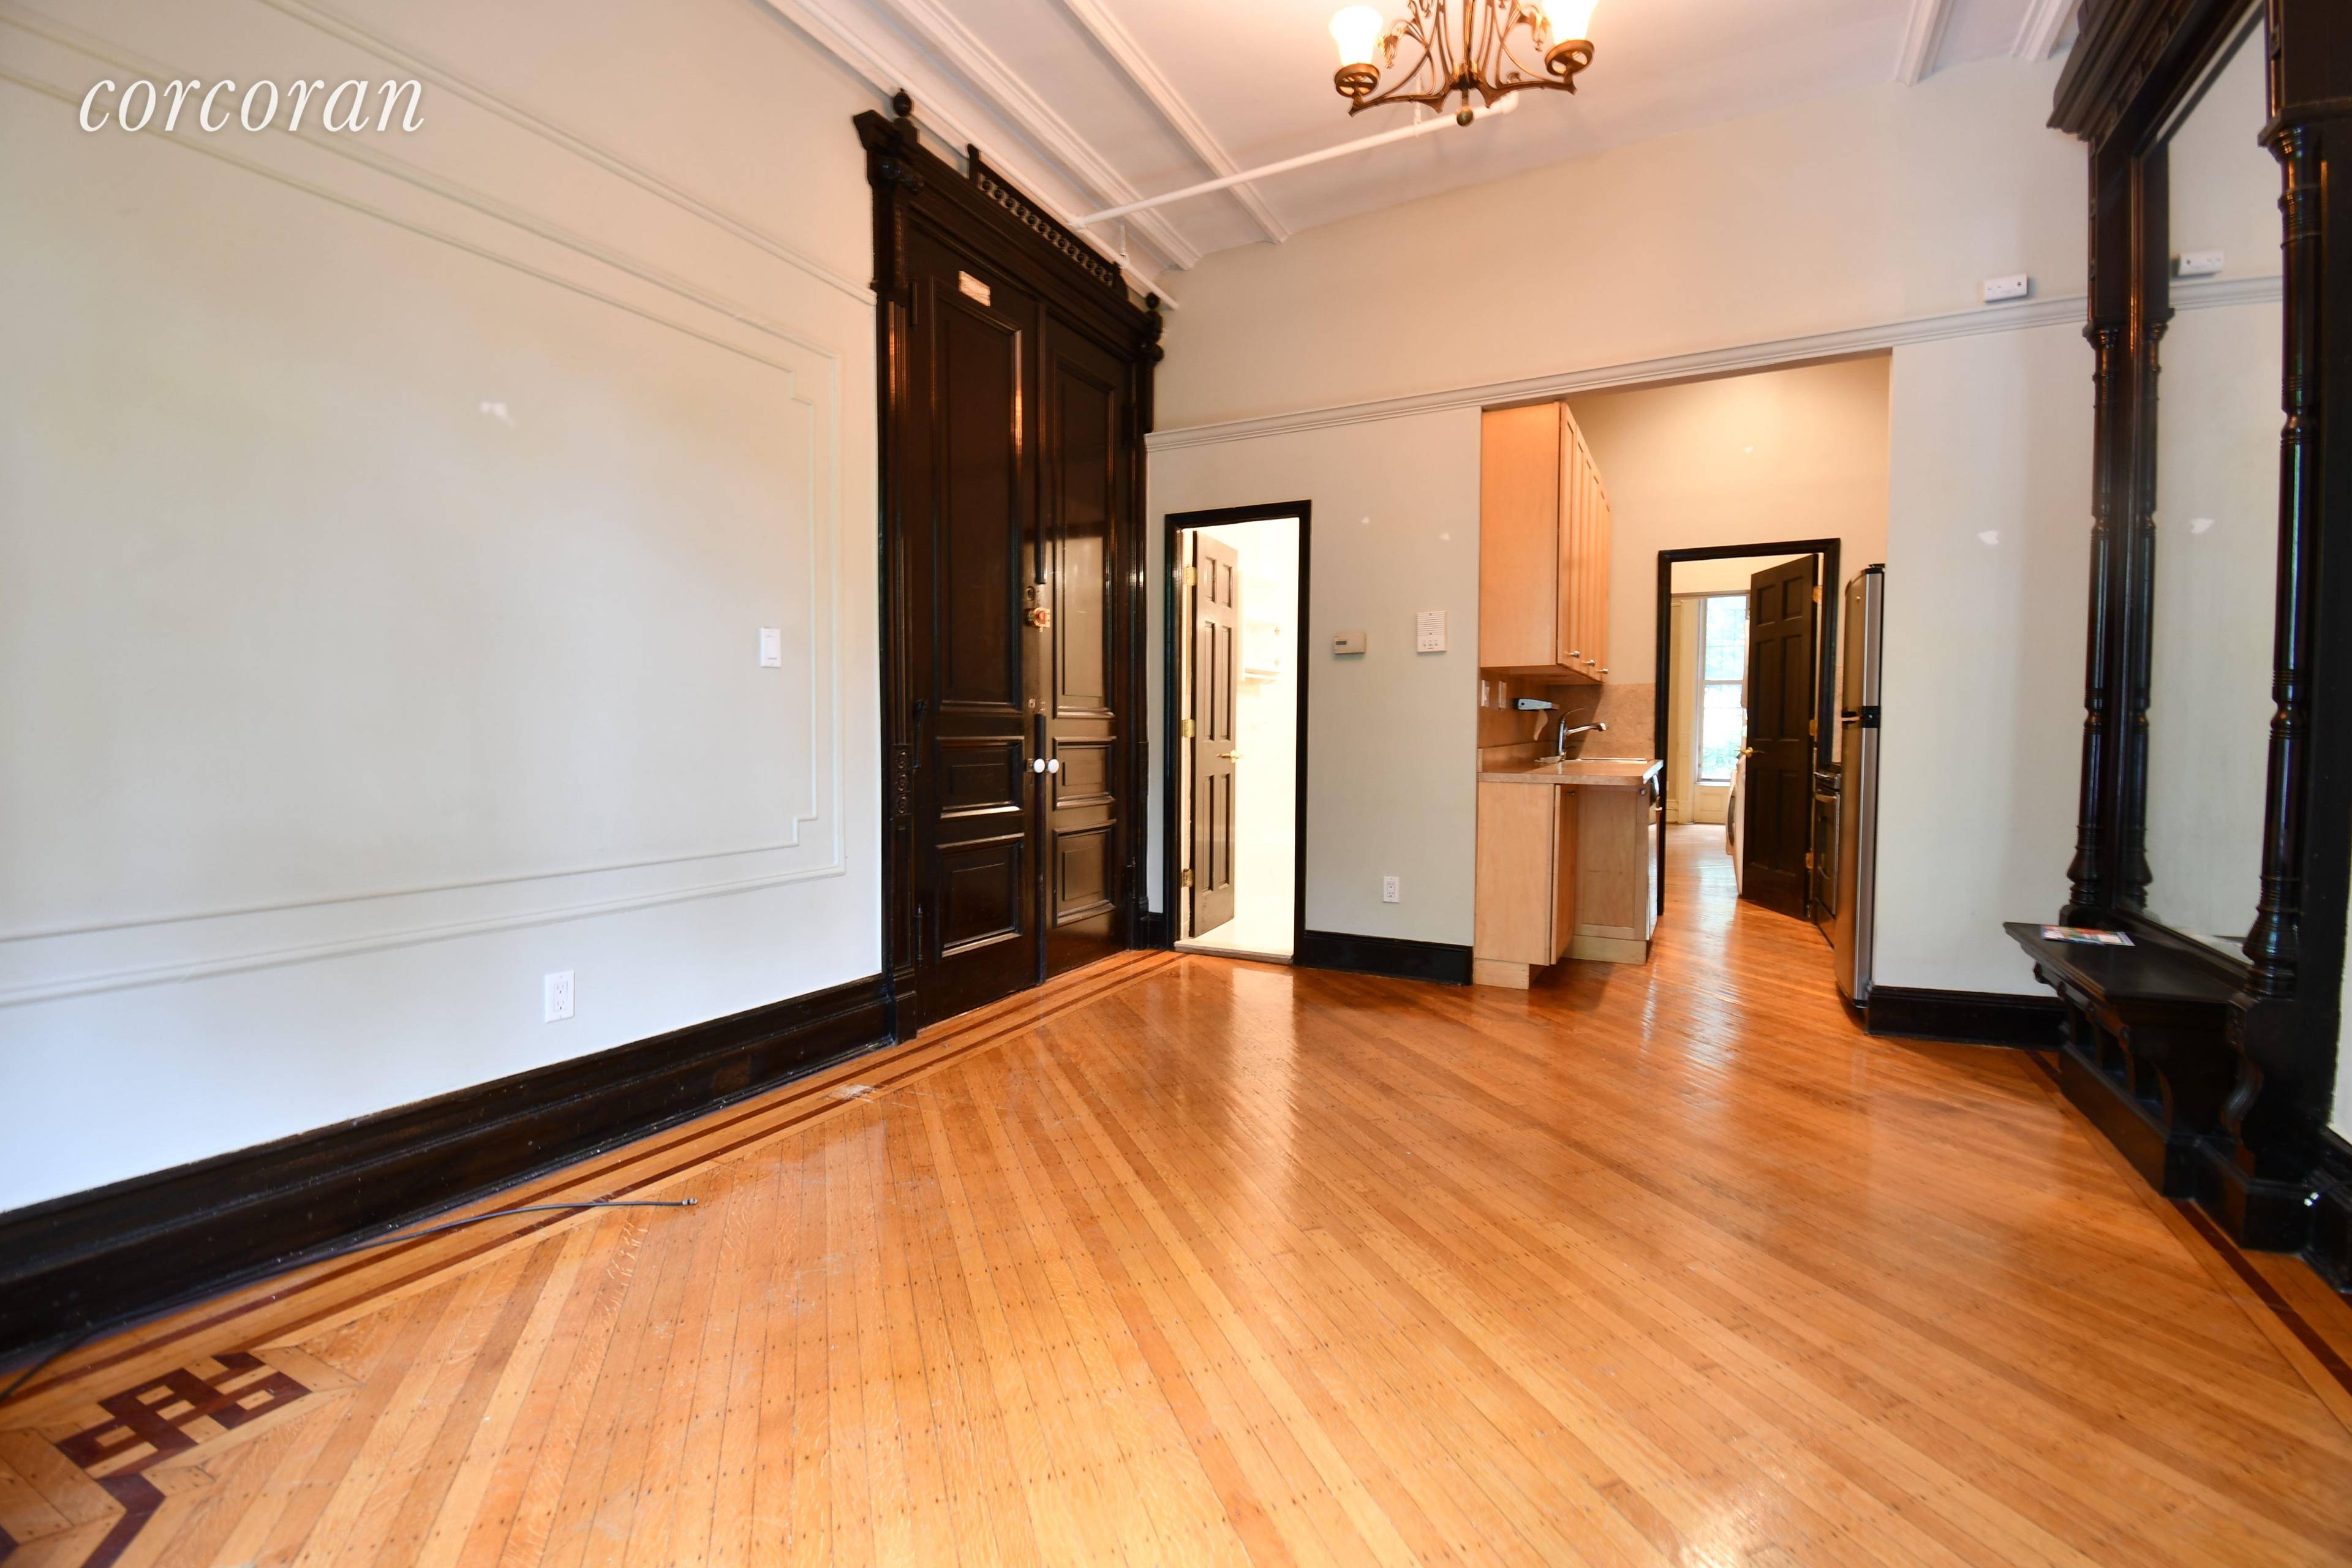 Welcome to this beautiful Bed Stuy townhouse 2 bedroom.